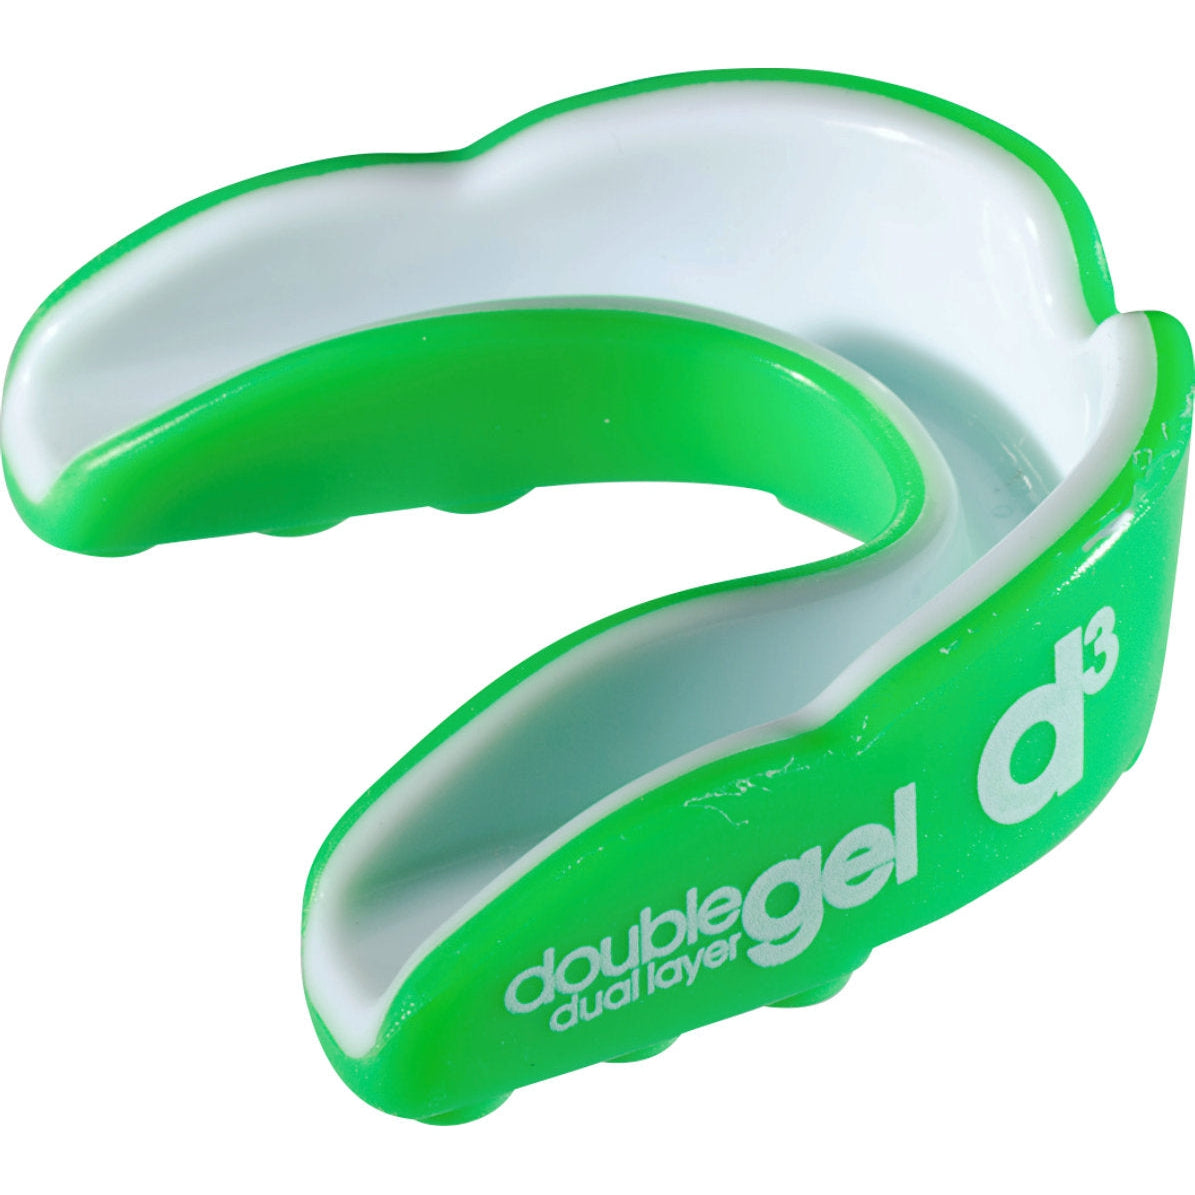 D3tape Mouthguard Green / White Youths